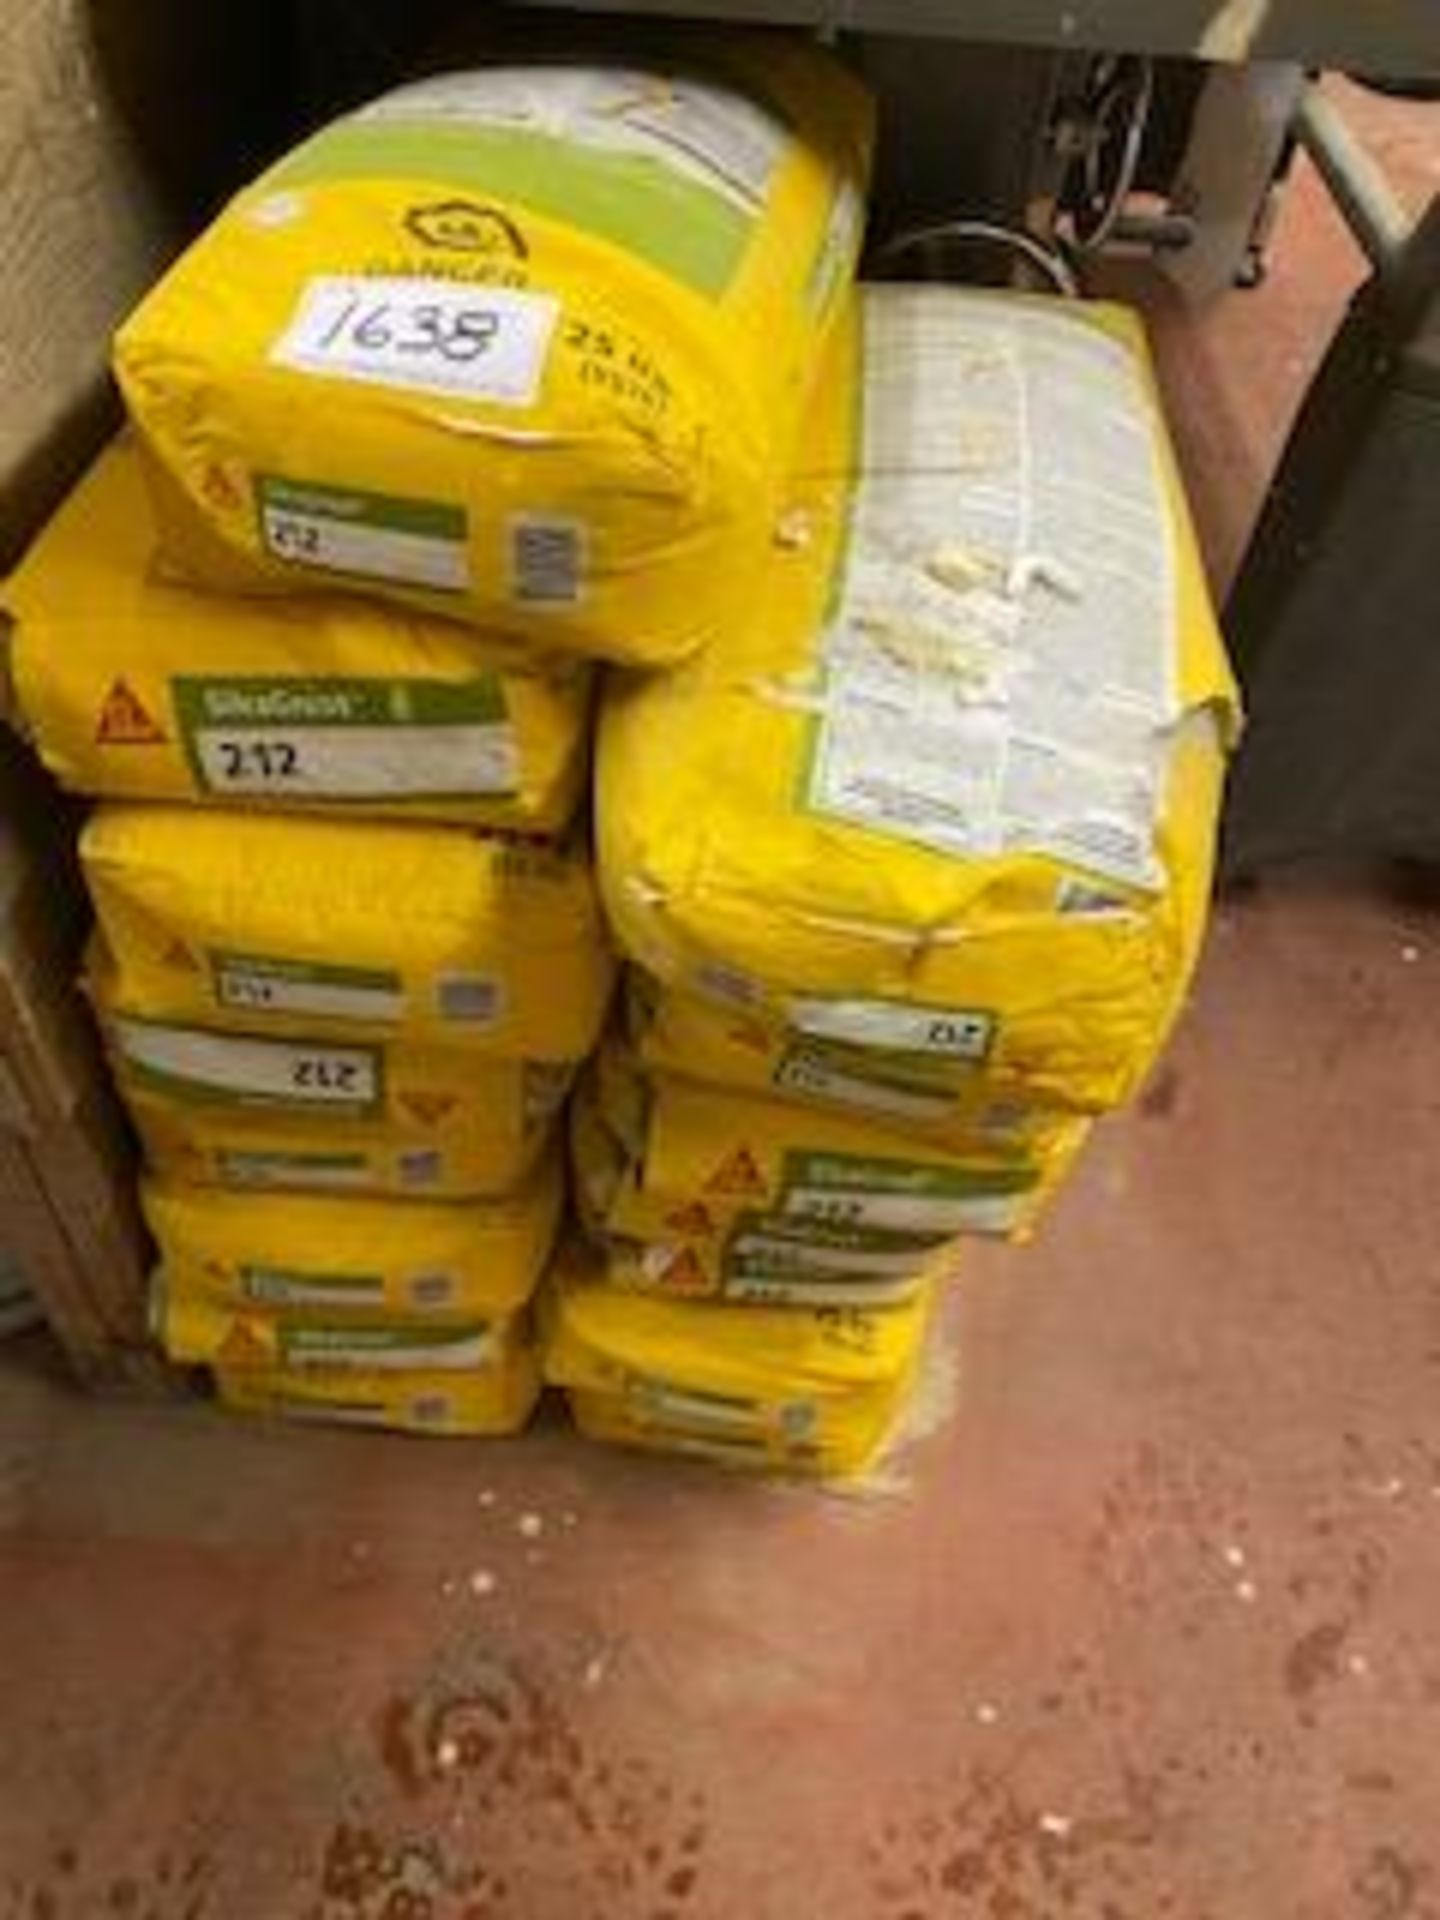 L/O CONCRETE PRODUCT & 13 BAGS GROUT (212) - GP - Image 2 of 2